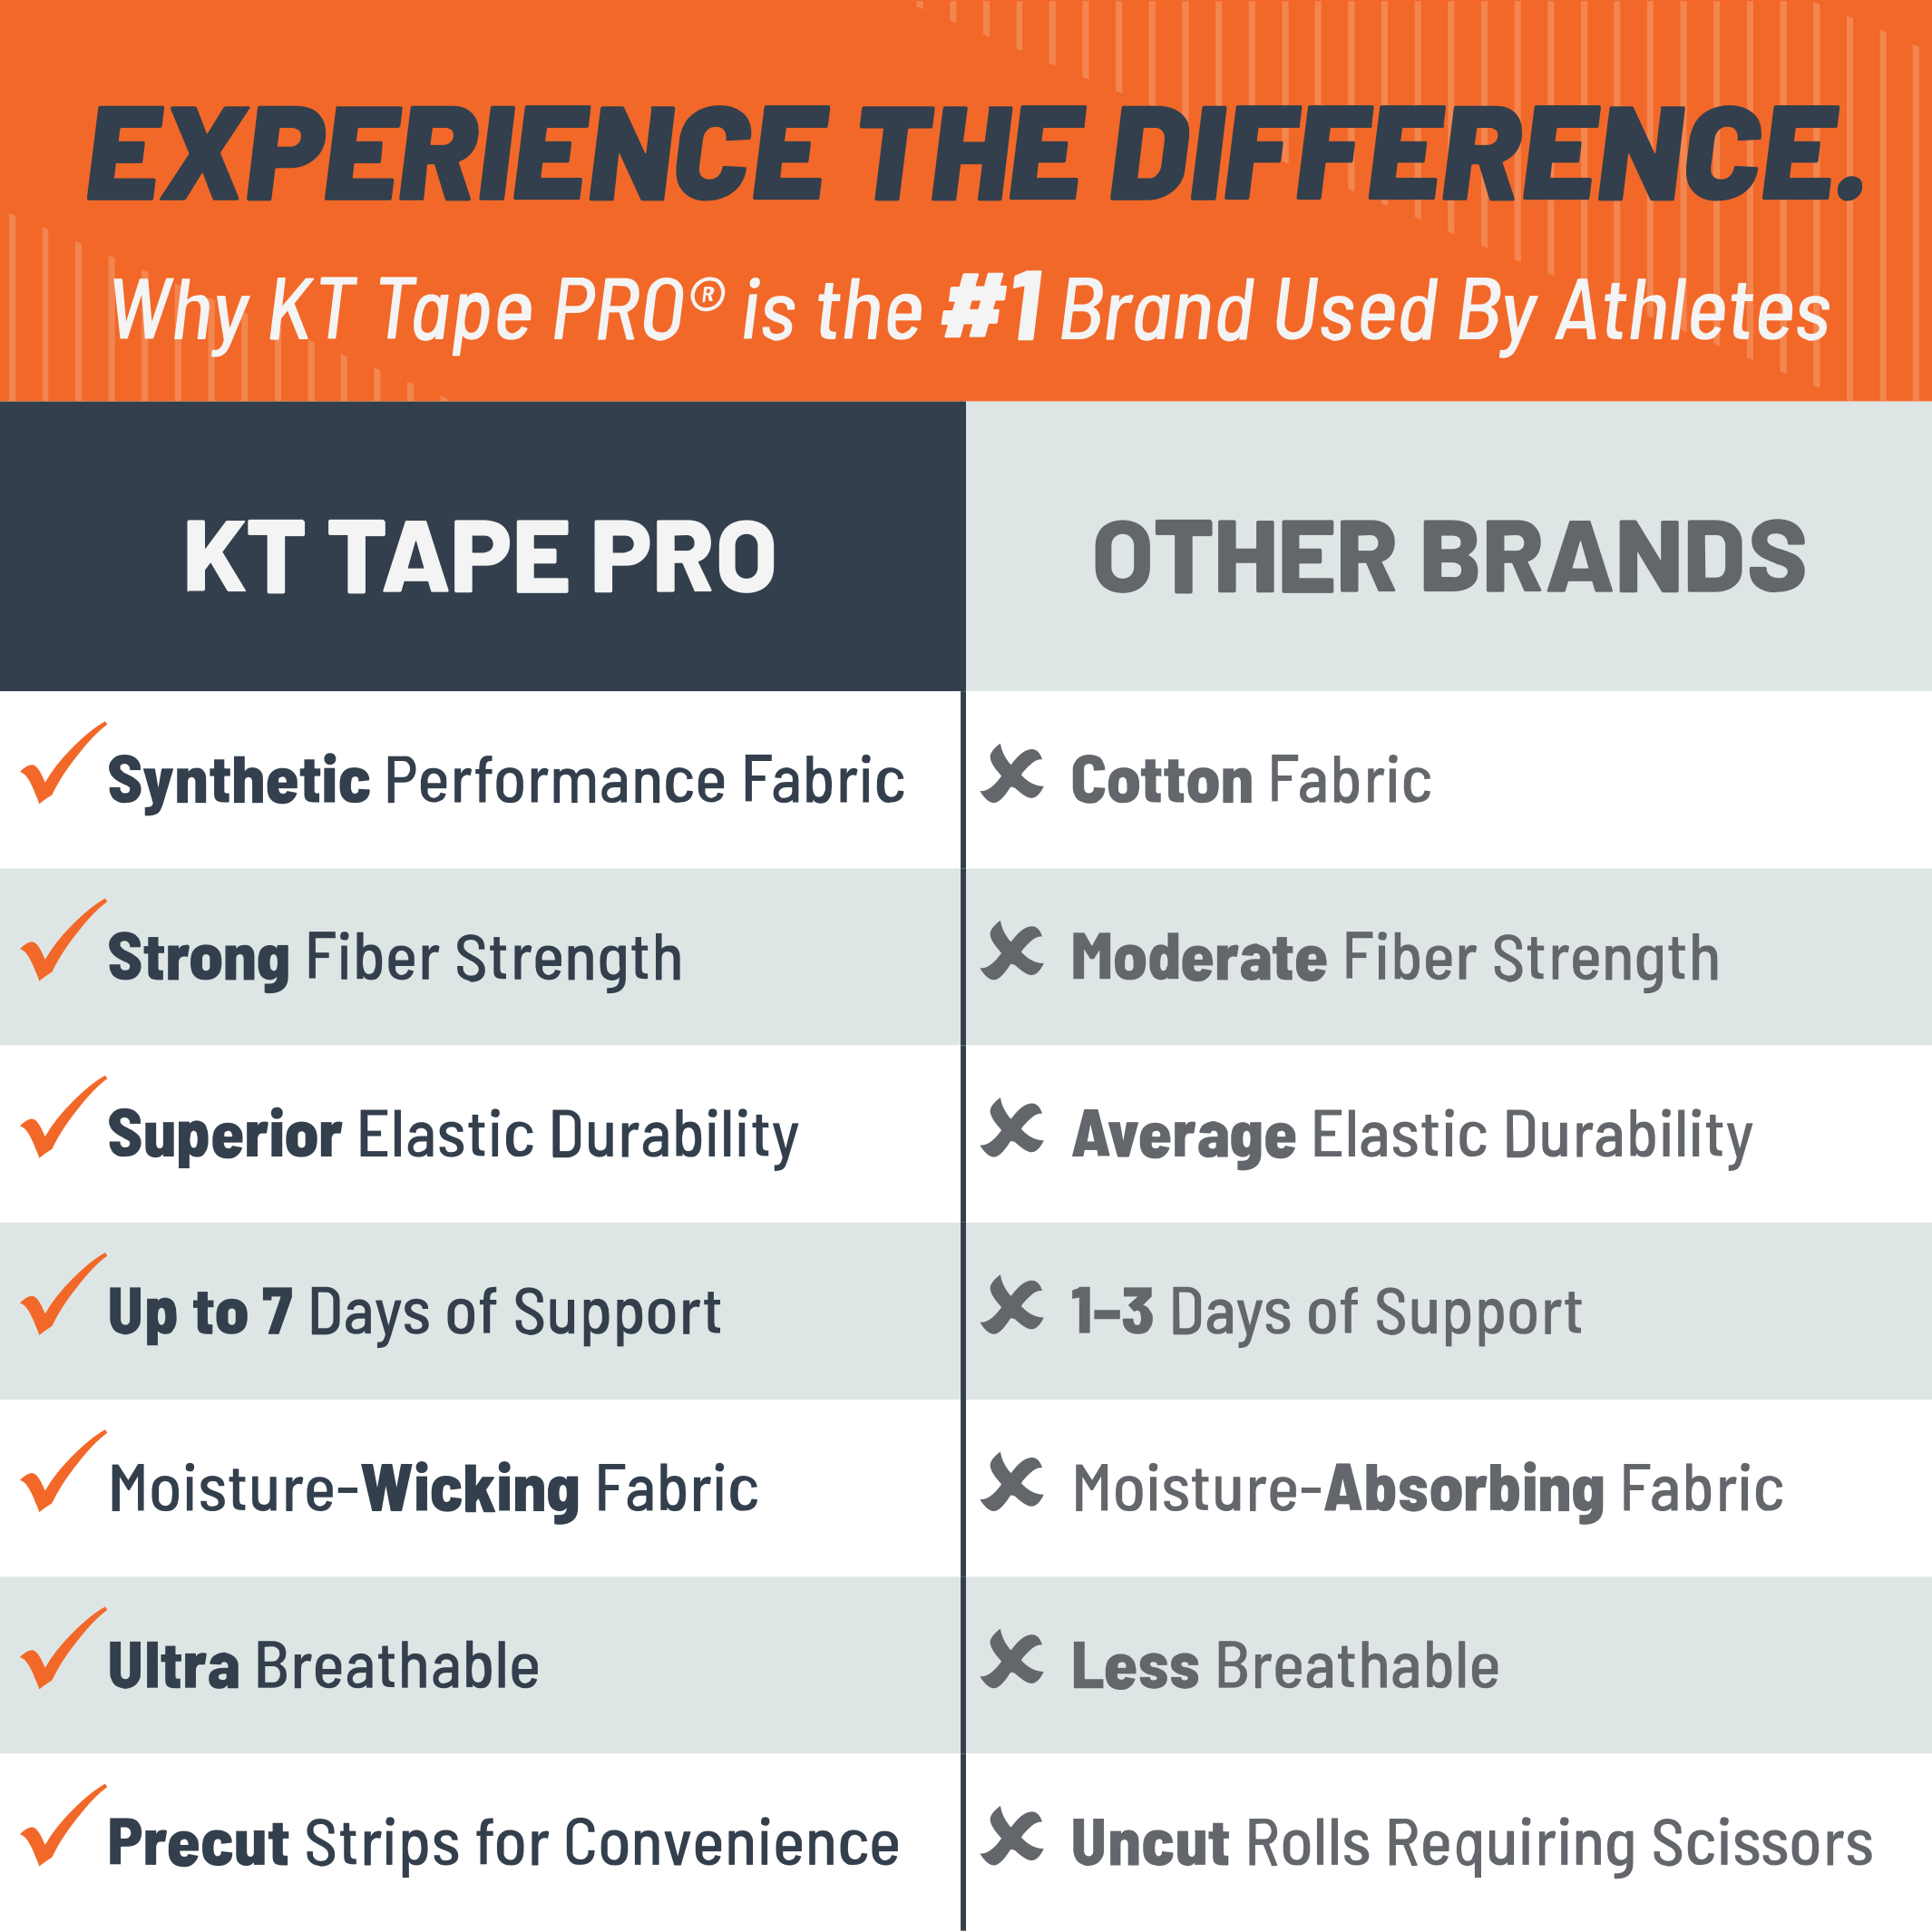 Why KT Tape Pro is the #1 Brand Used By Athletes